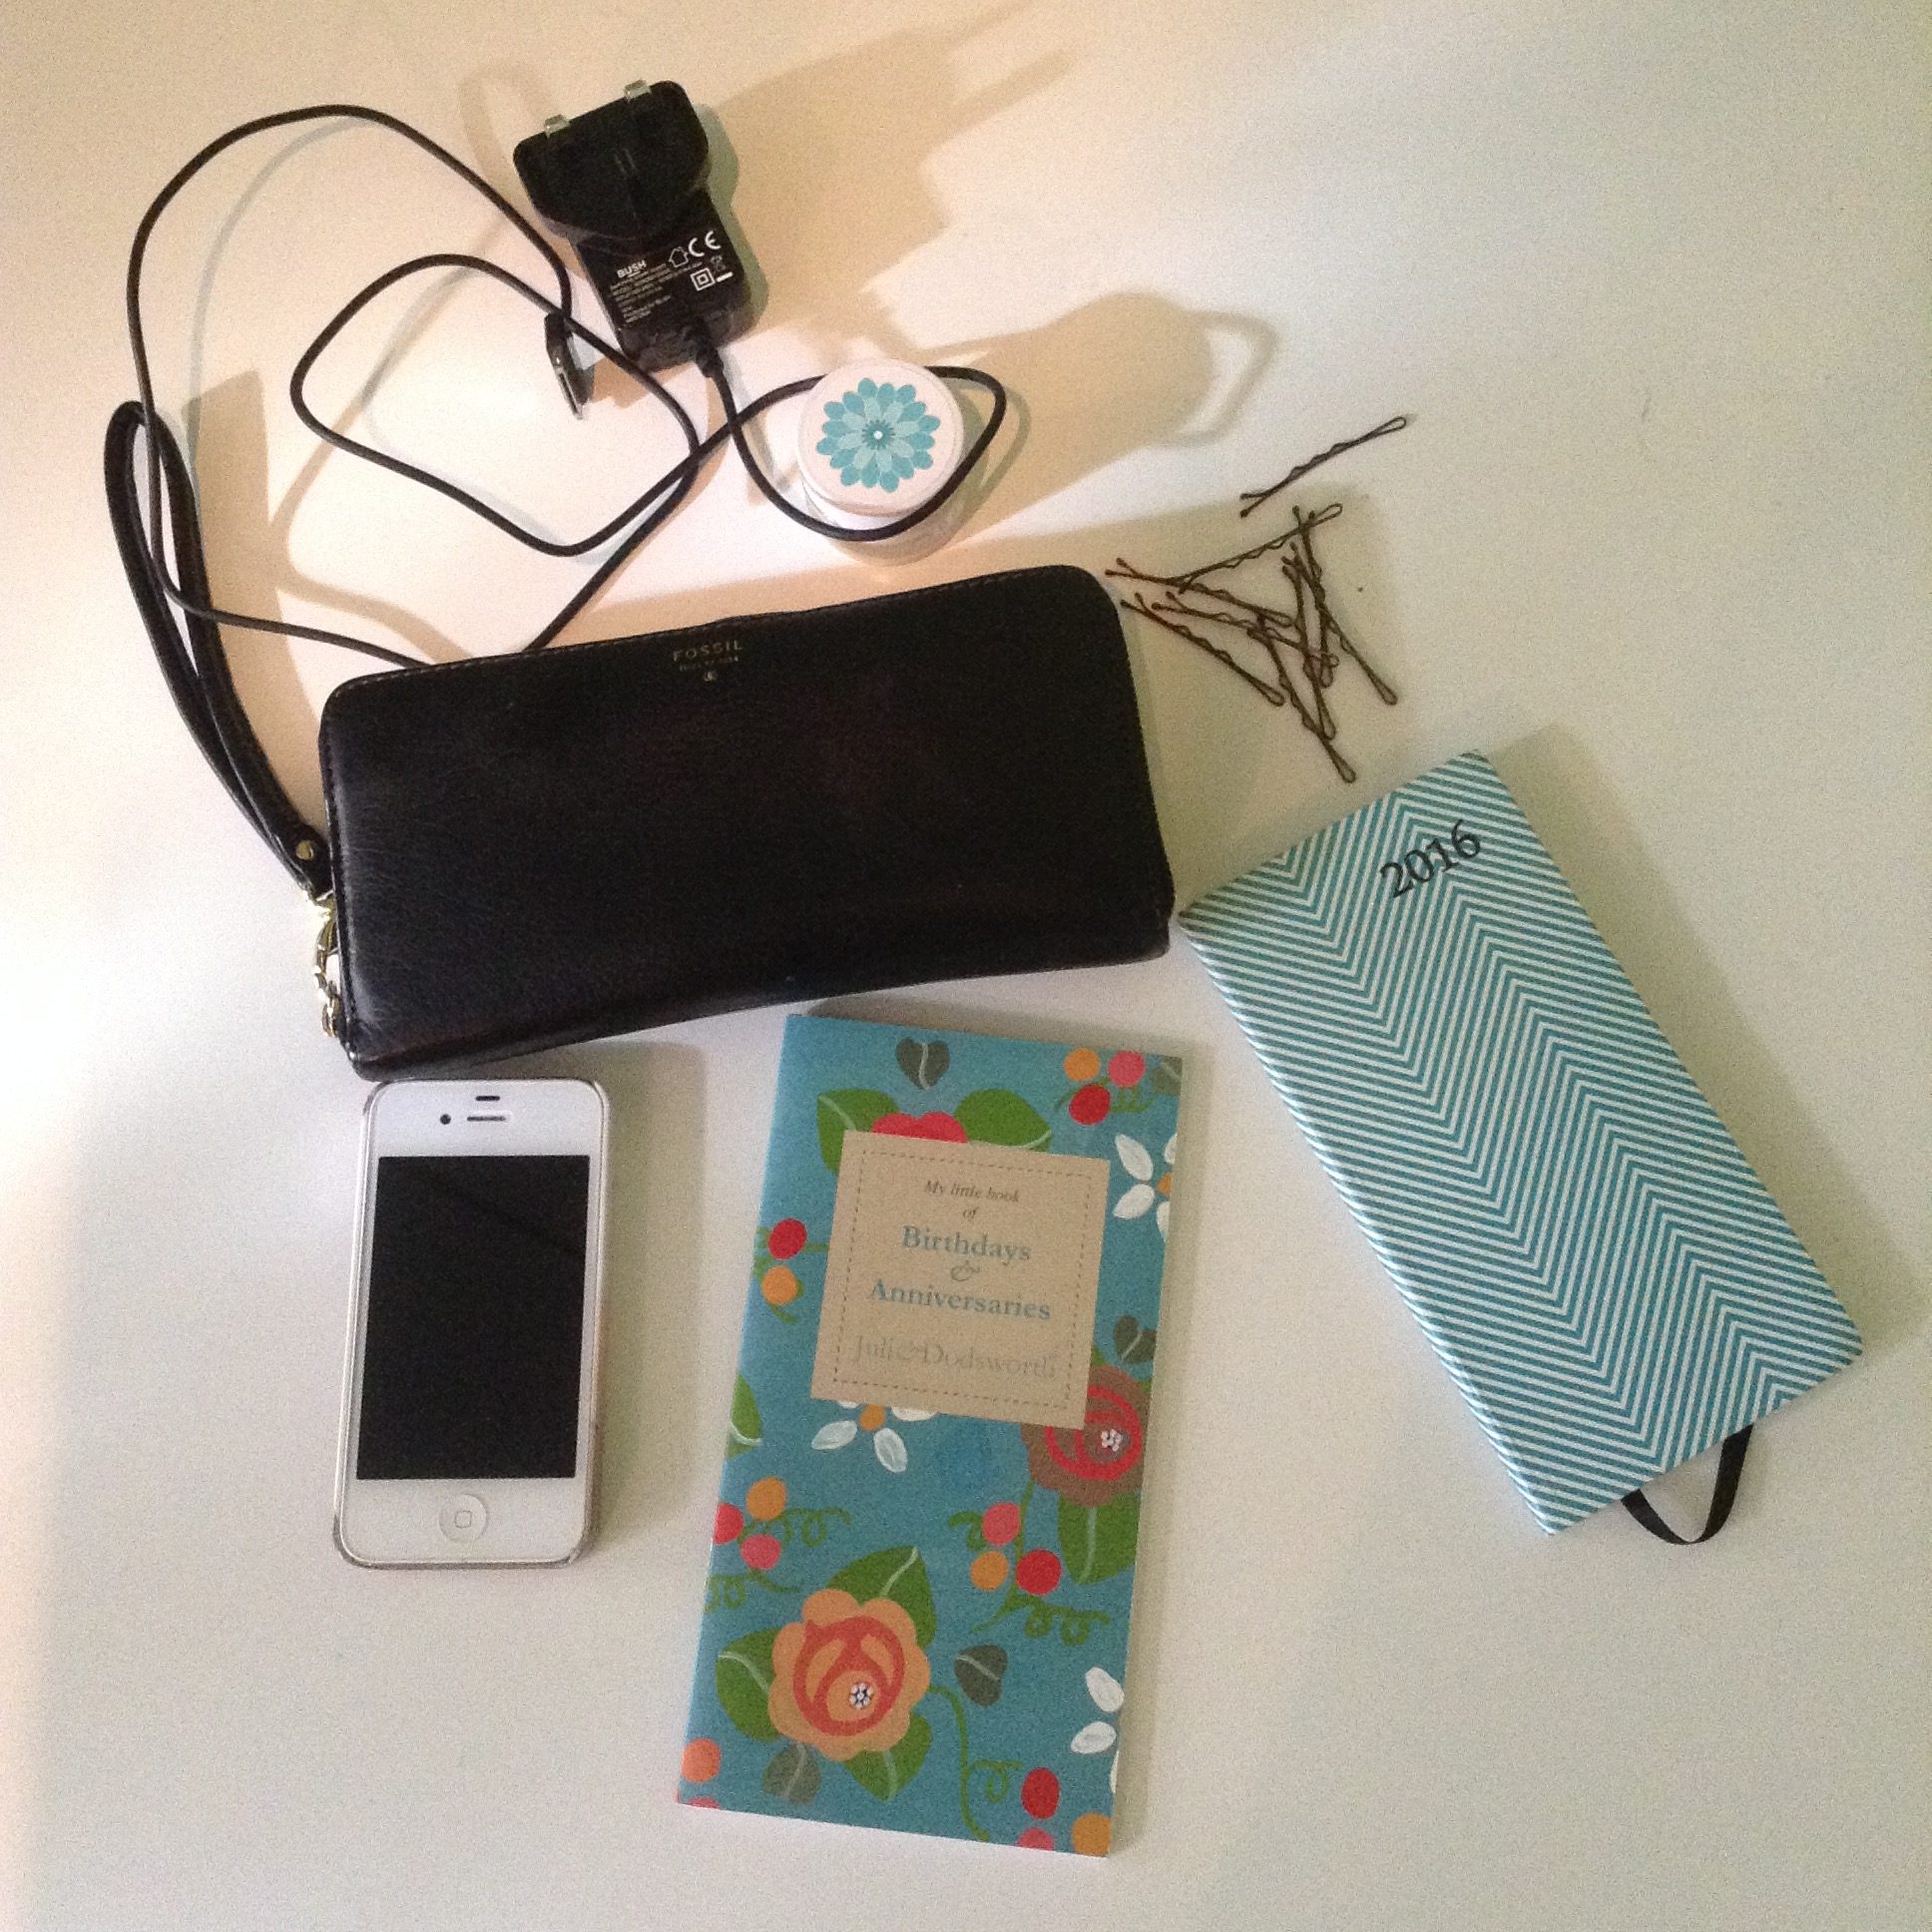 Blogtober, what's in my bag. Photo of white iPhone 4, julie Dodsworth floral birthday book, white and green stripy diary, black phone charger, brown kirby grips, black leather fossil purse, lip balm